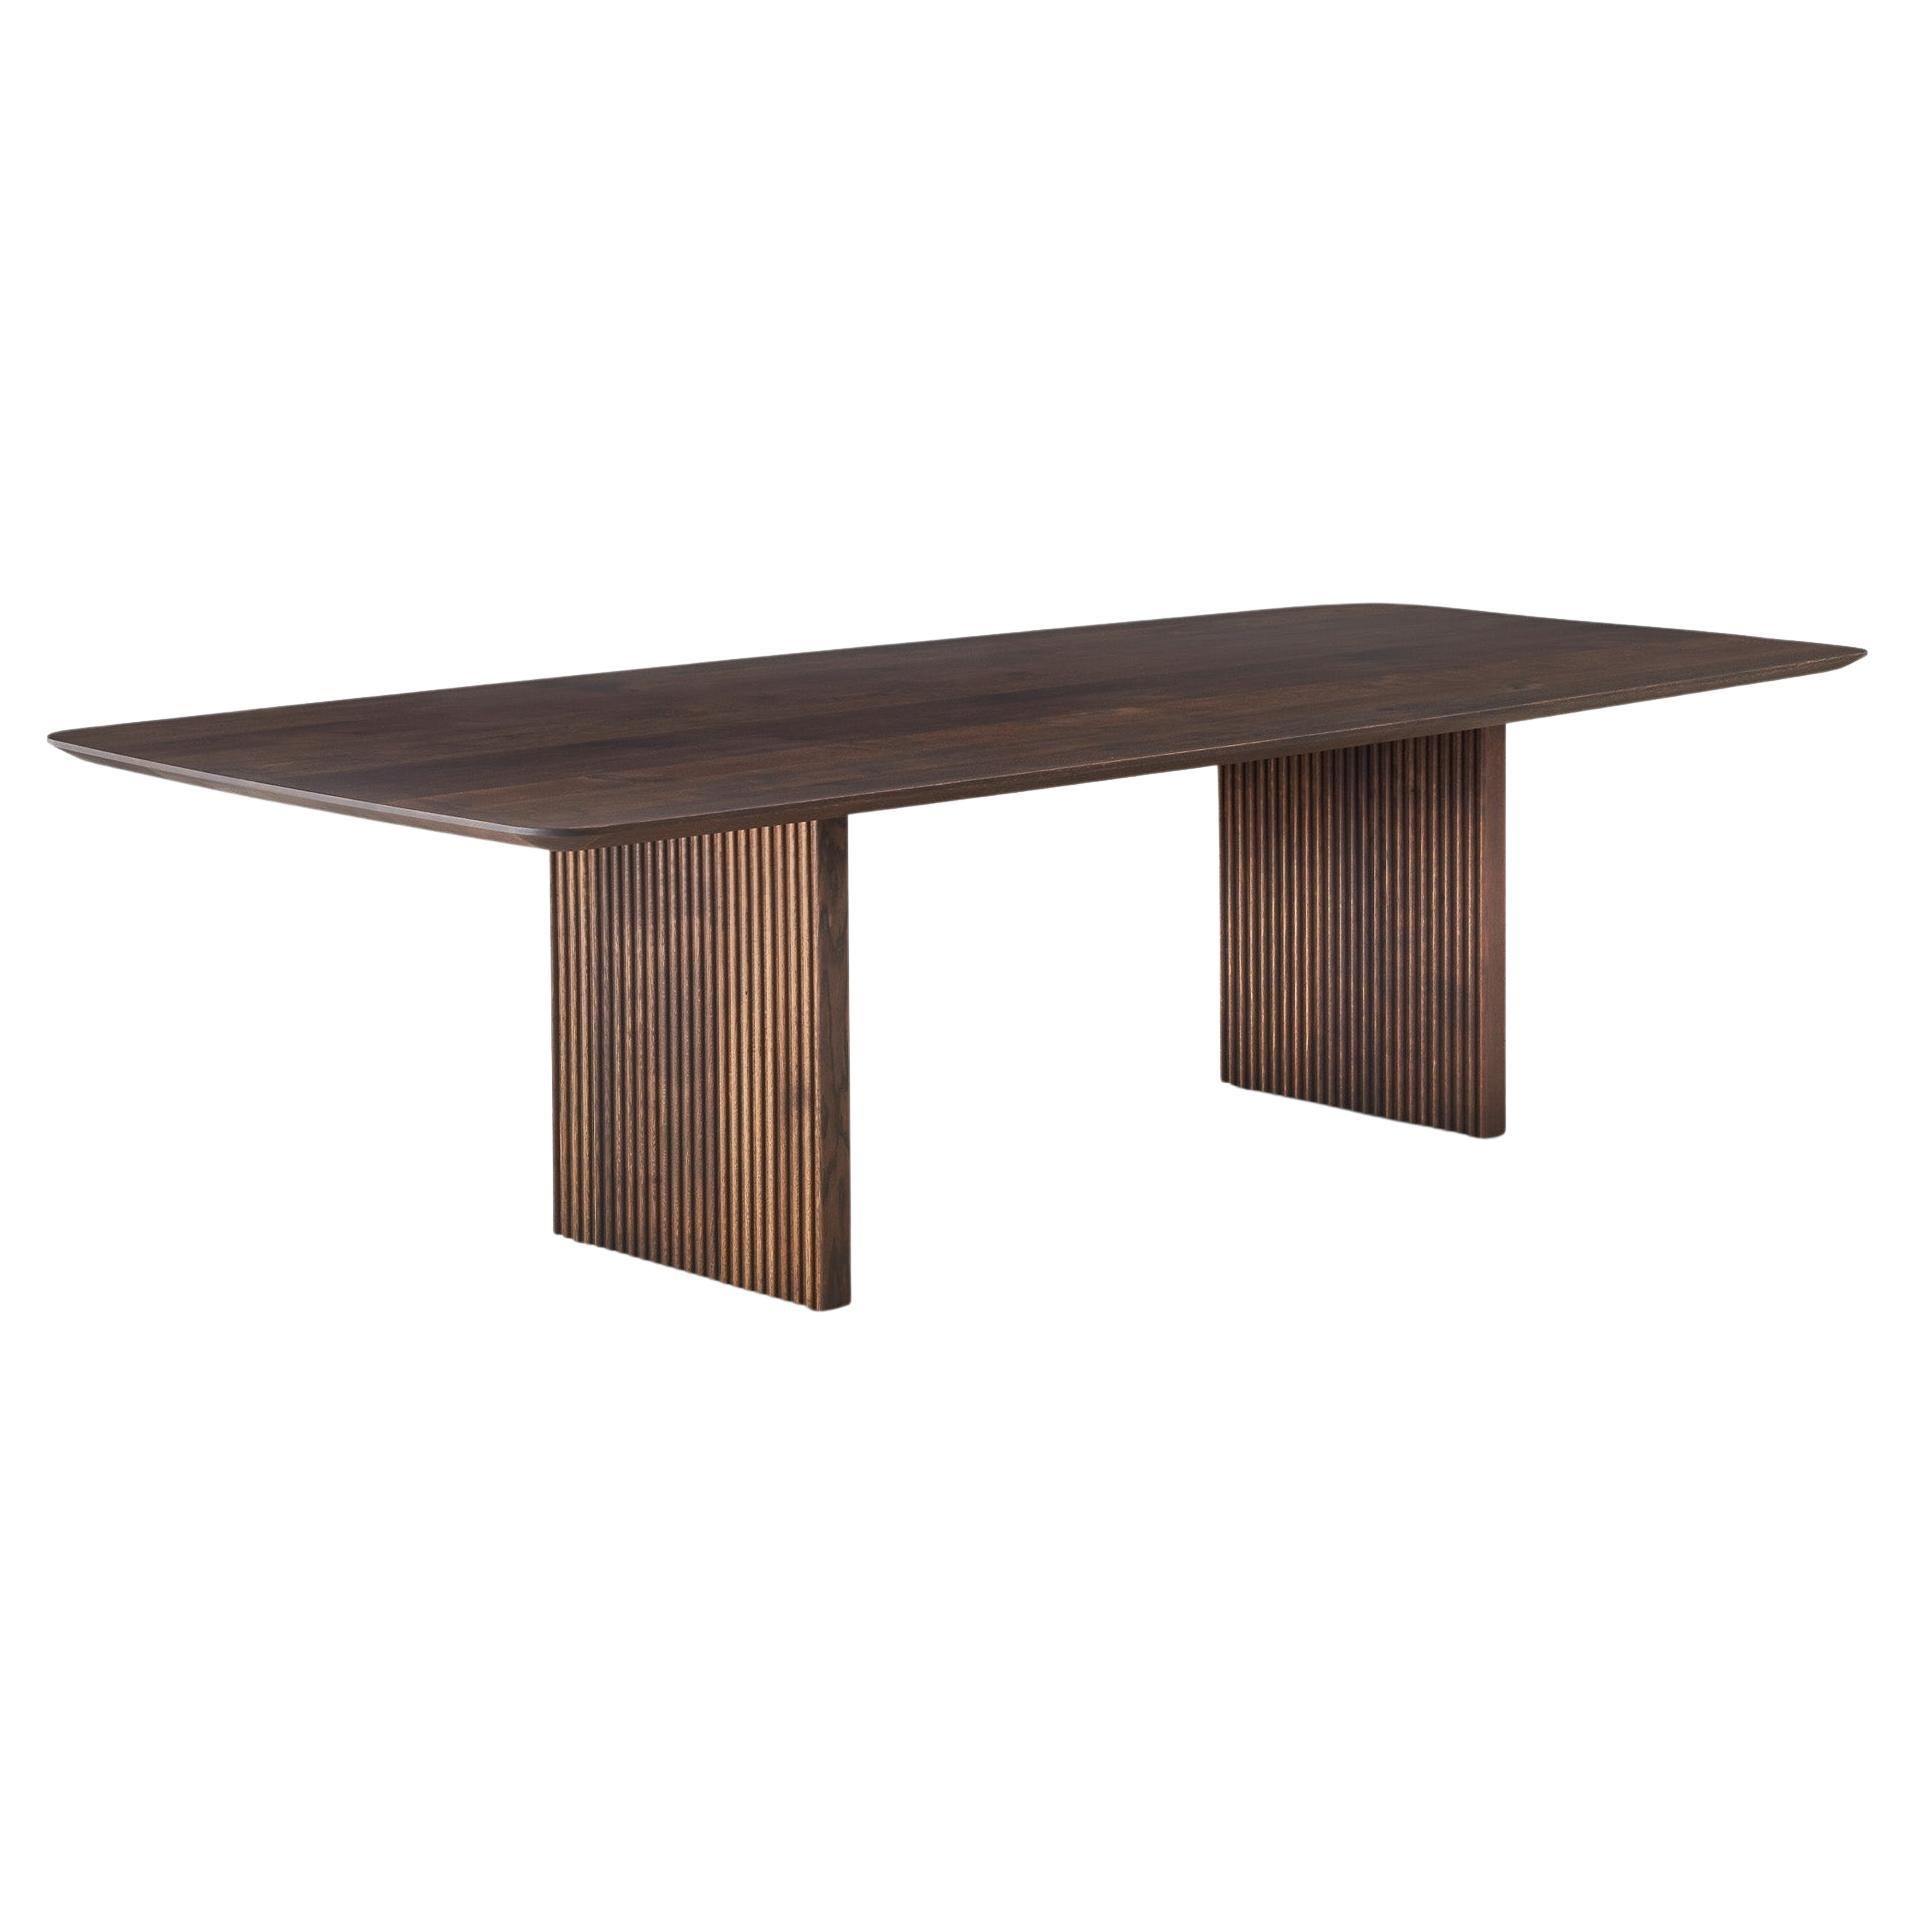 Customizable Dining Table TEN 270, Smoked Oak or Walnut For Sale